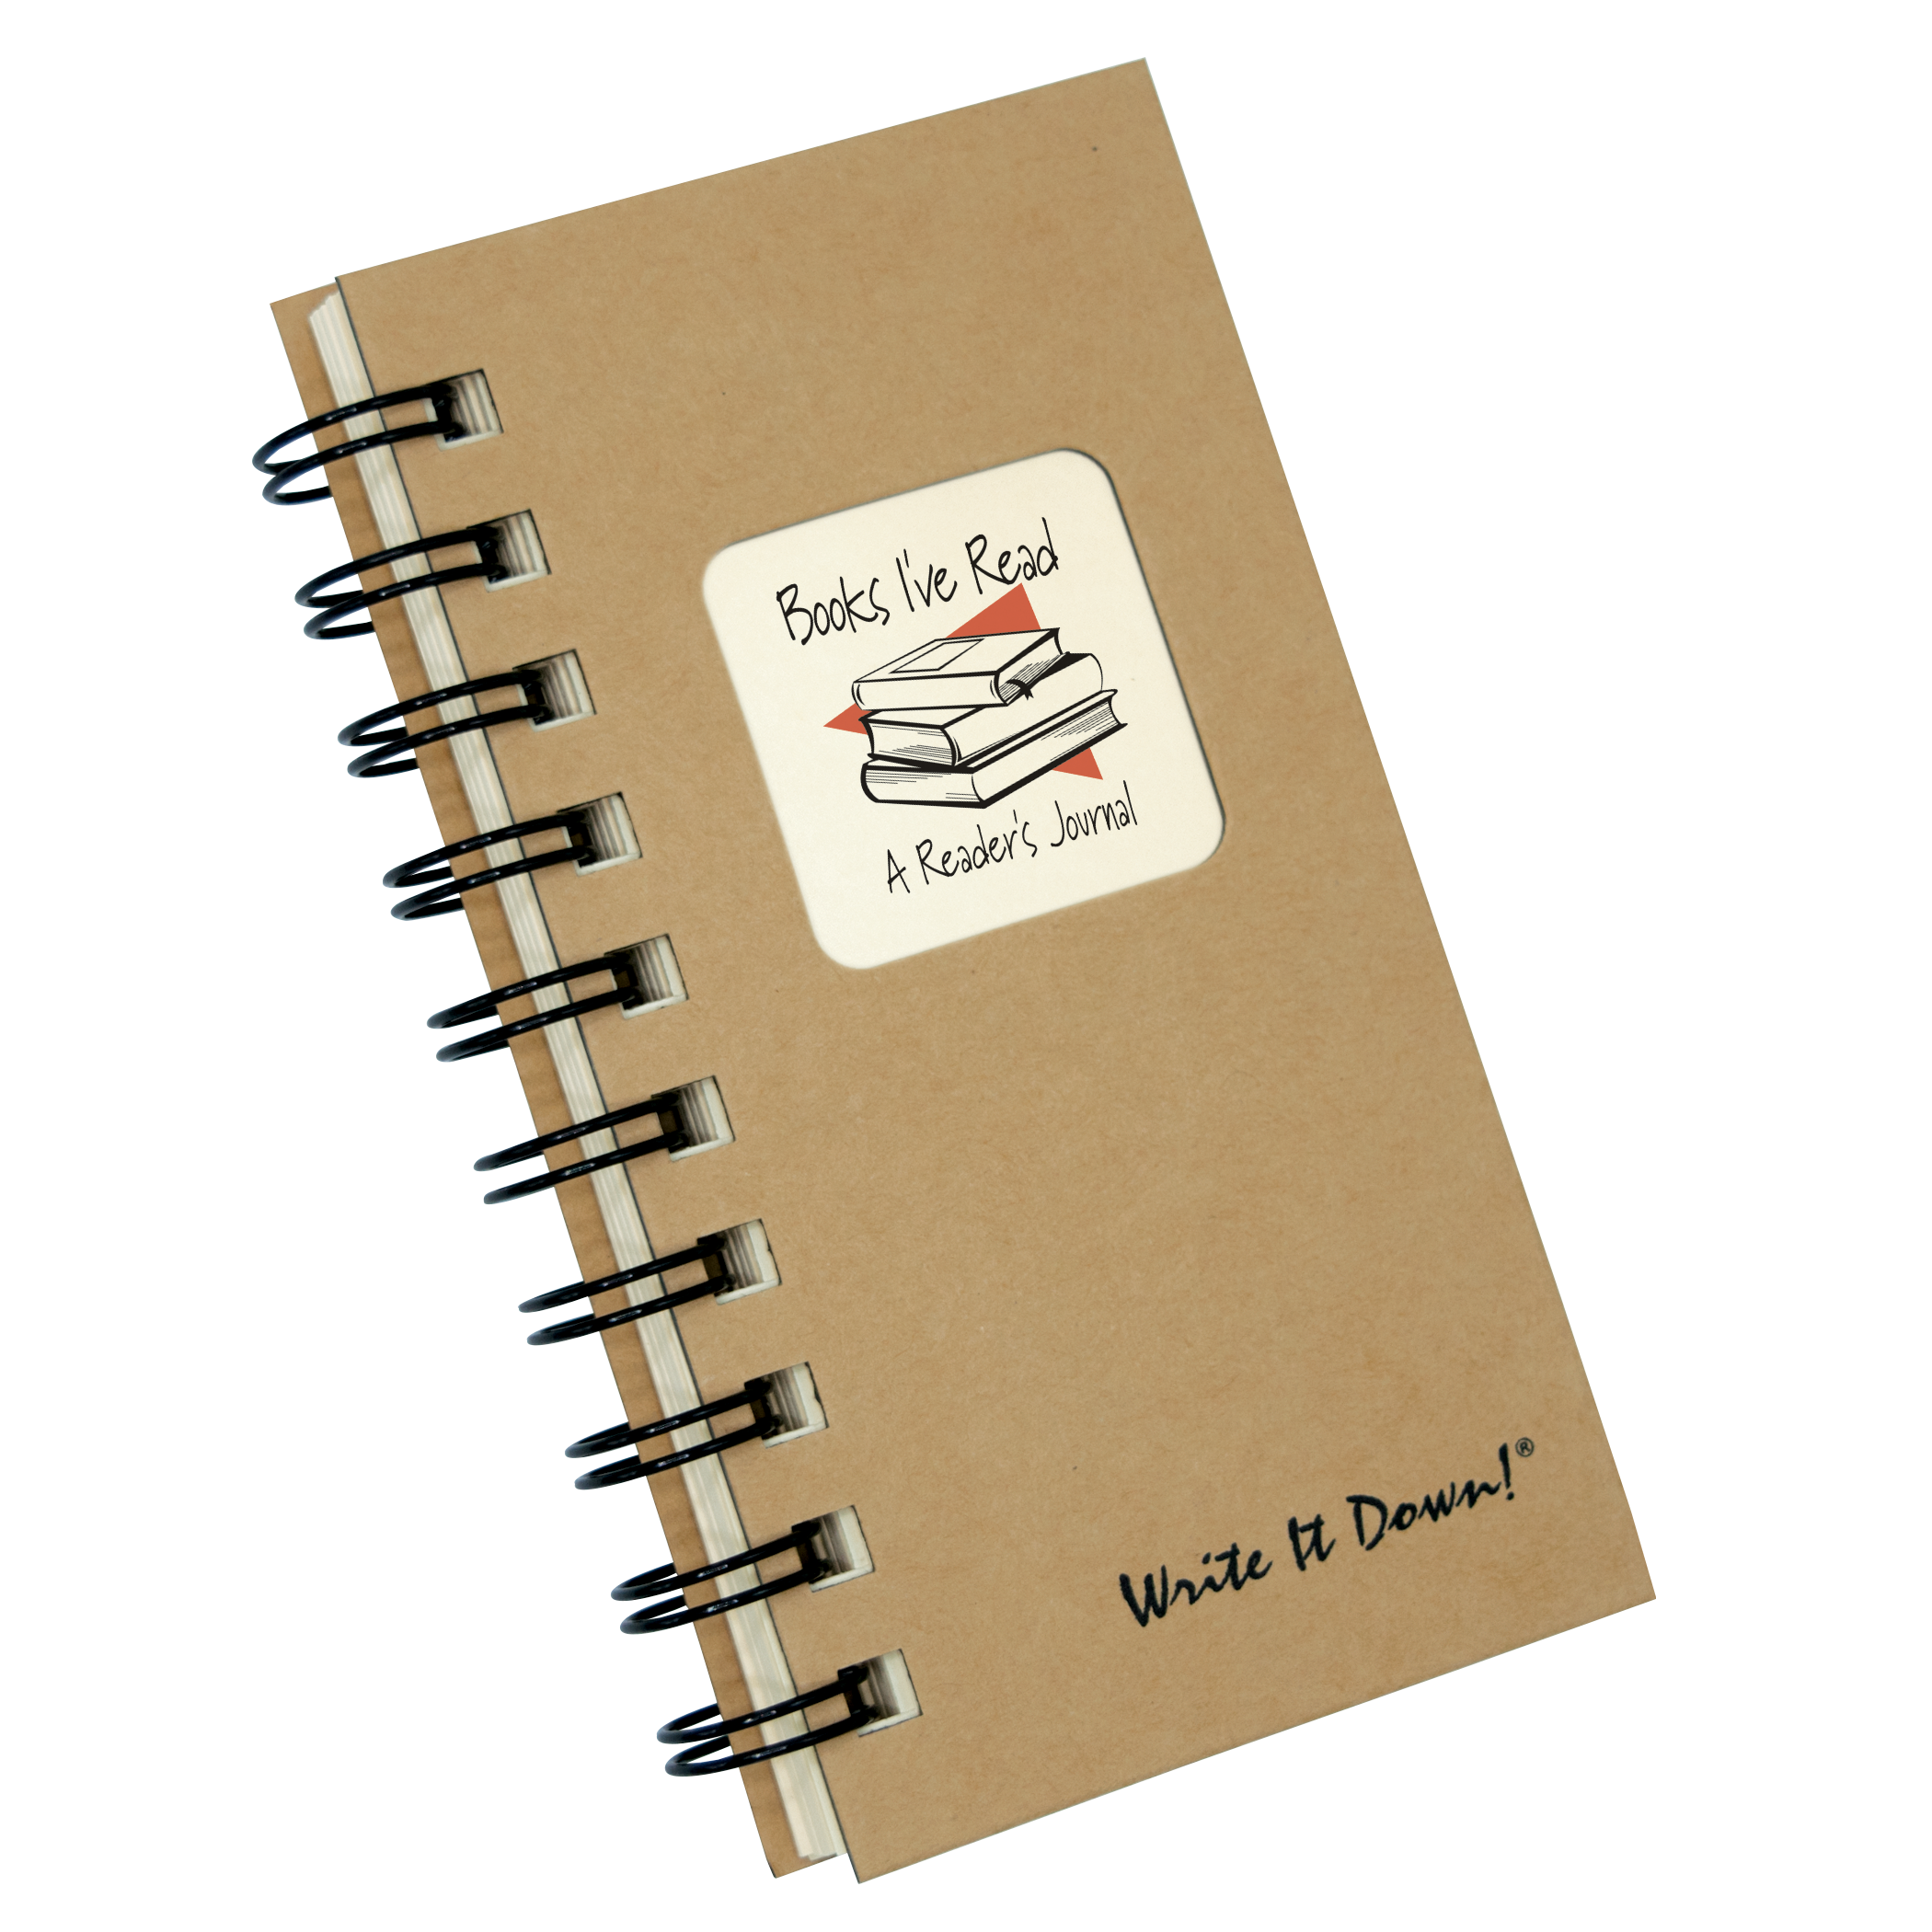 Books I've Read – A Reader's Mini Journal | Journals Unlimited, Inc